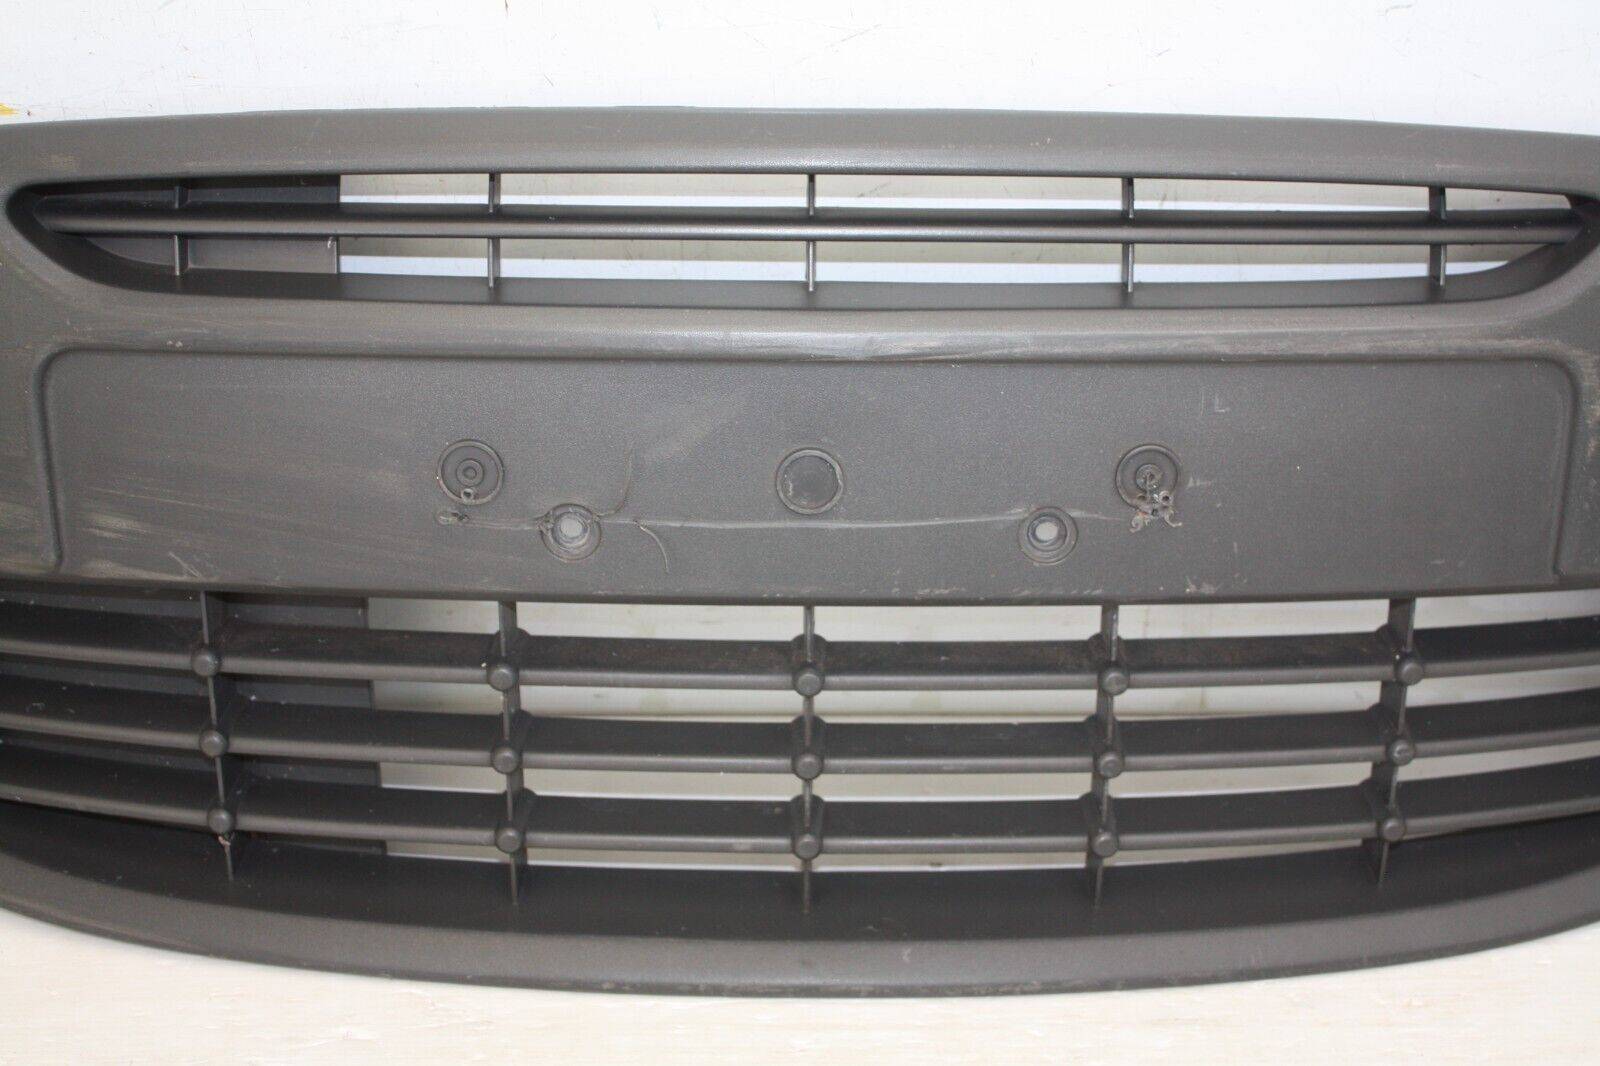 Ford-KA-Front-Bumper-Grill-2009-TO-2016-735437417-Genuine-GOT-DEEP-SCRATCHES-175720937010-3